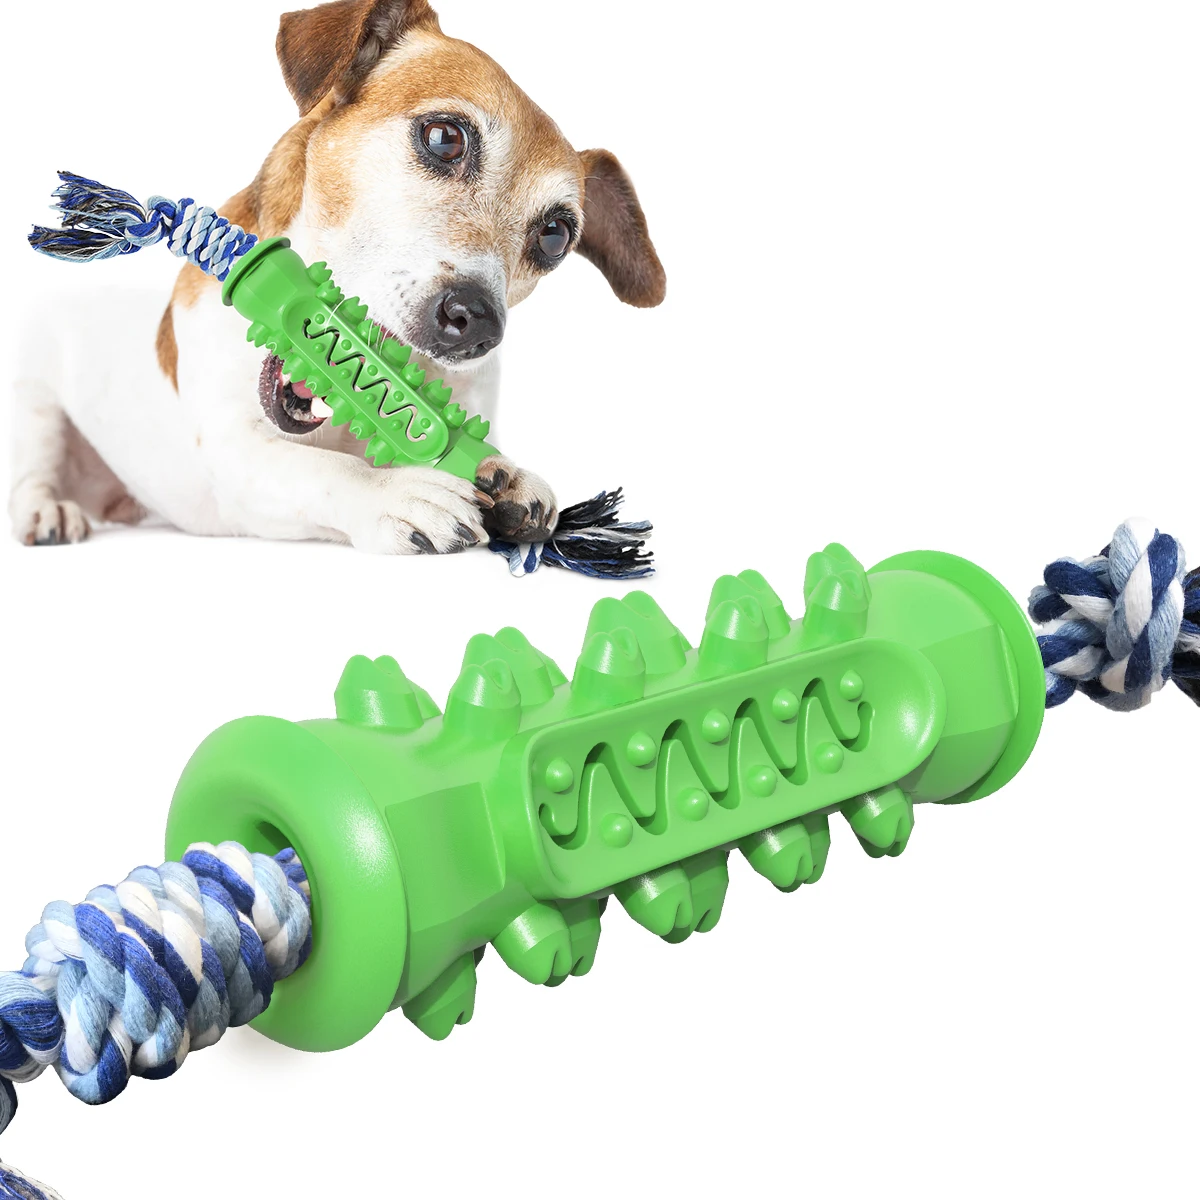 

Most popular high quality bite-resistant star pet dog cooling pet training clean teeth chew dog toy, Blue/yellow/green